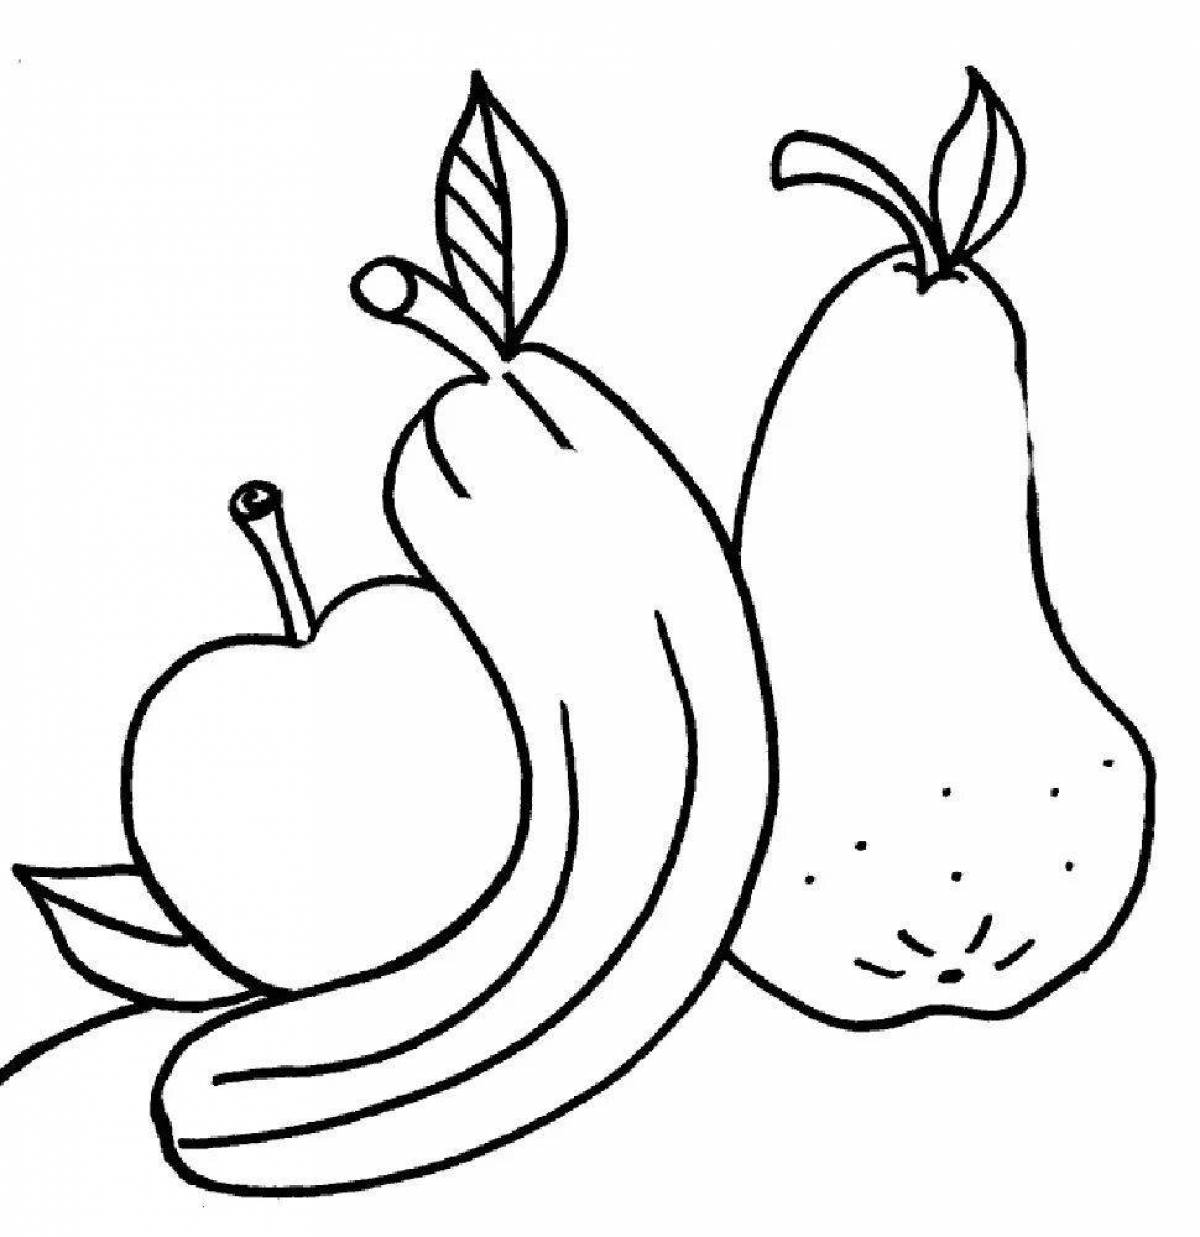 Bold fruits and vegetables coloring pages for kids